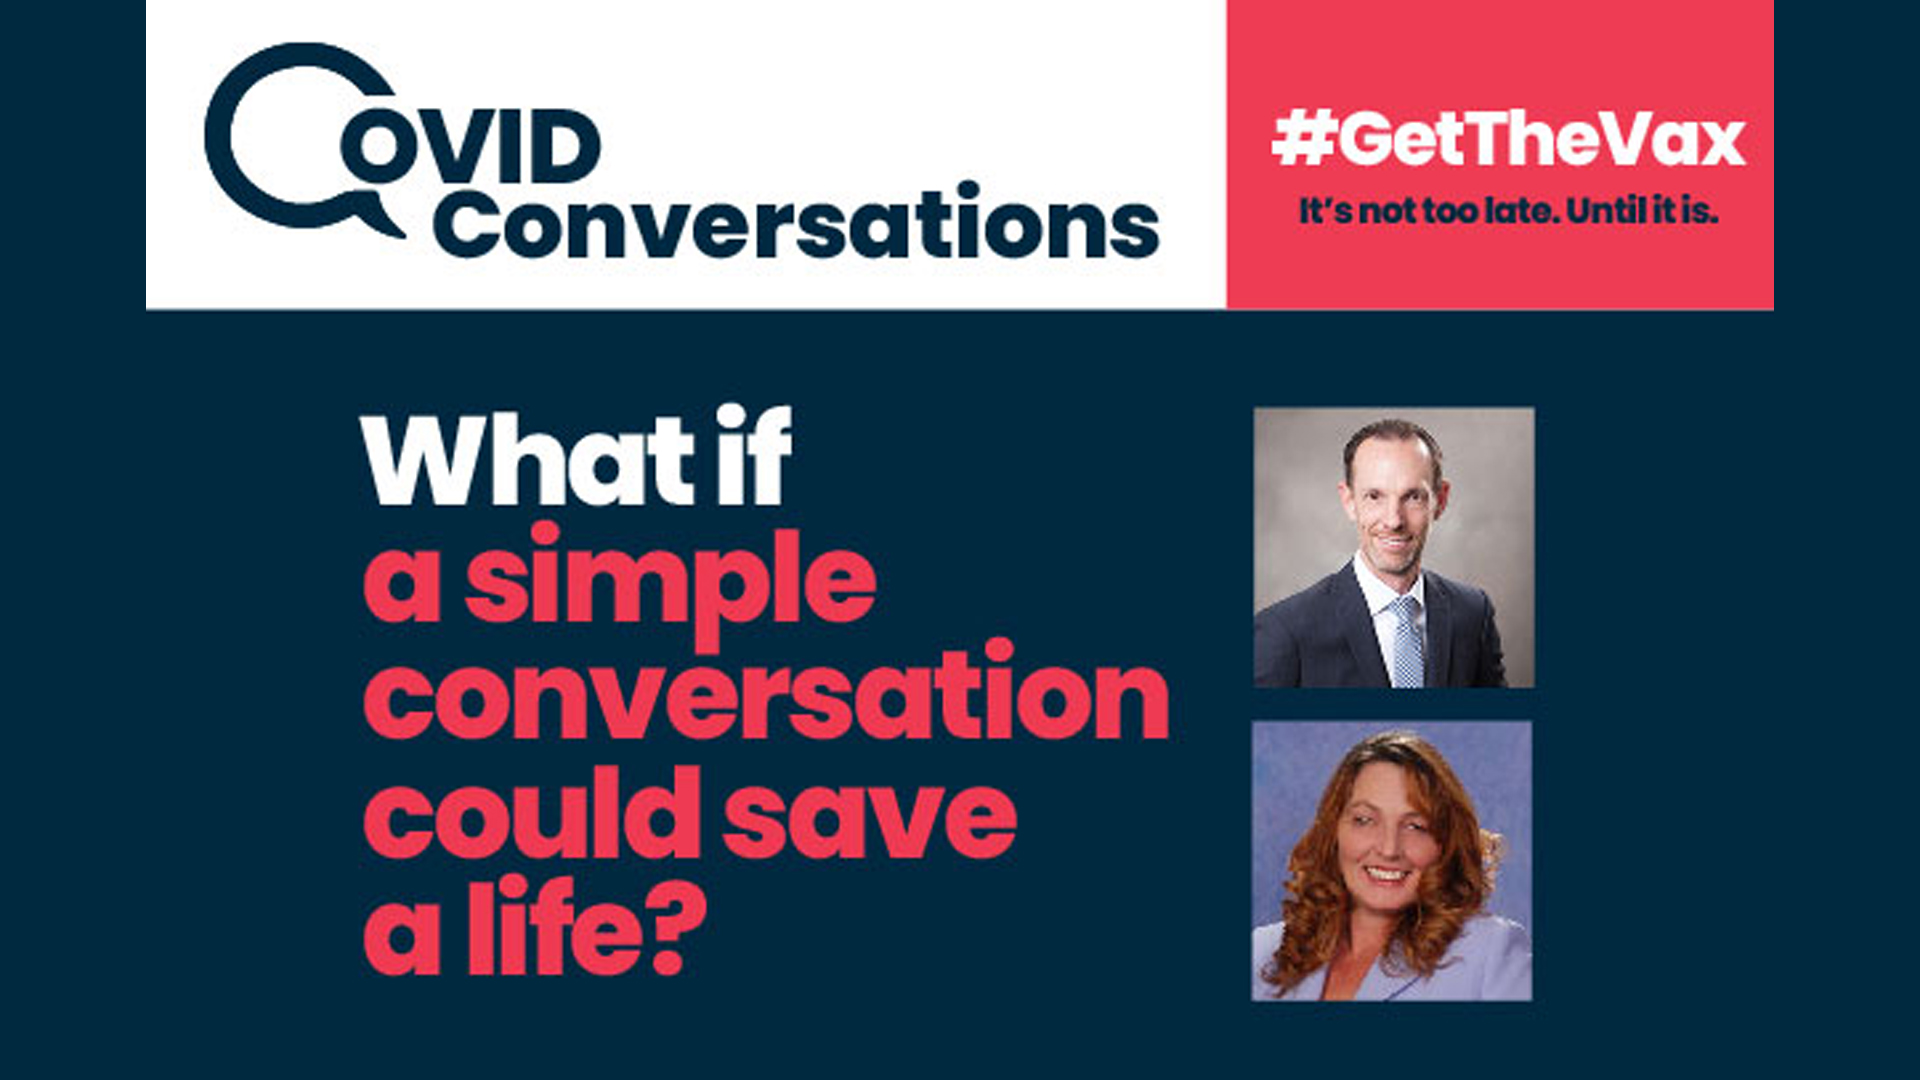 COVID Conversations #getthevax it's not too late. Until it is. What if a simple conversation could save a life?